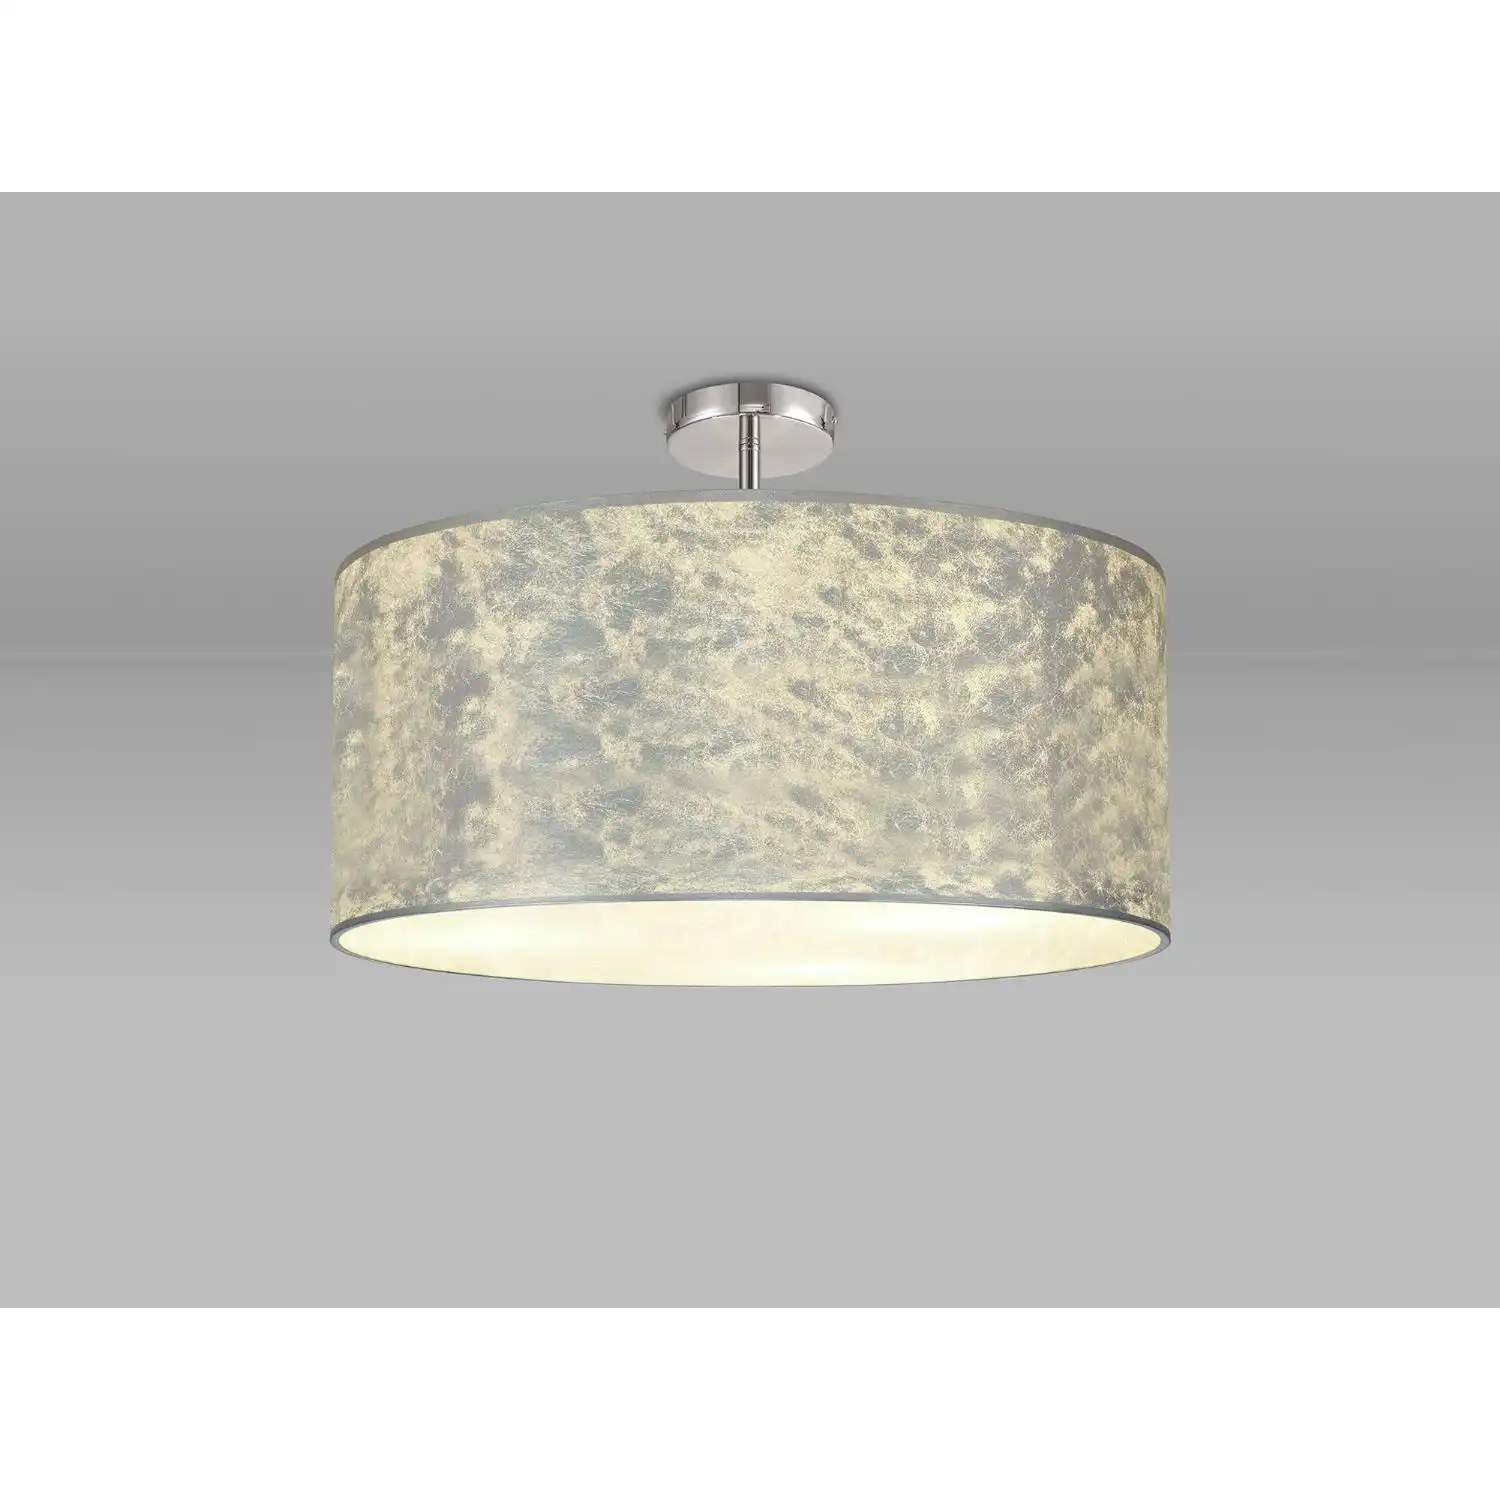 Baymont Polished Chrome 5 Light E27 Drop Flush Ceiling Fixture With 600mm Silver Leaf Shade